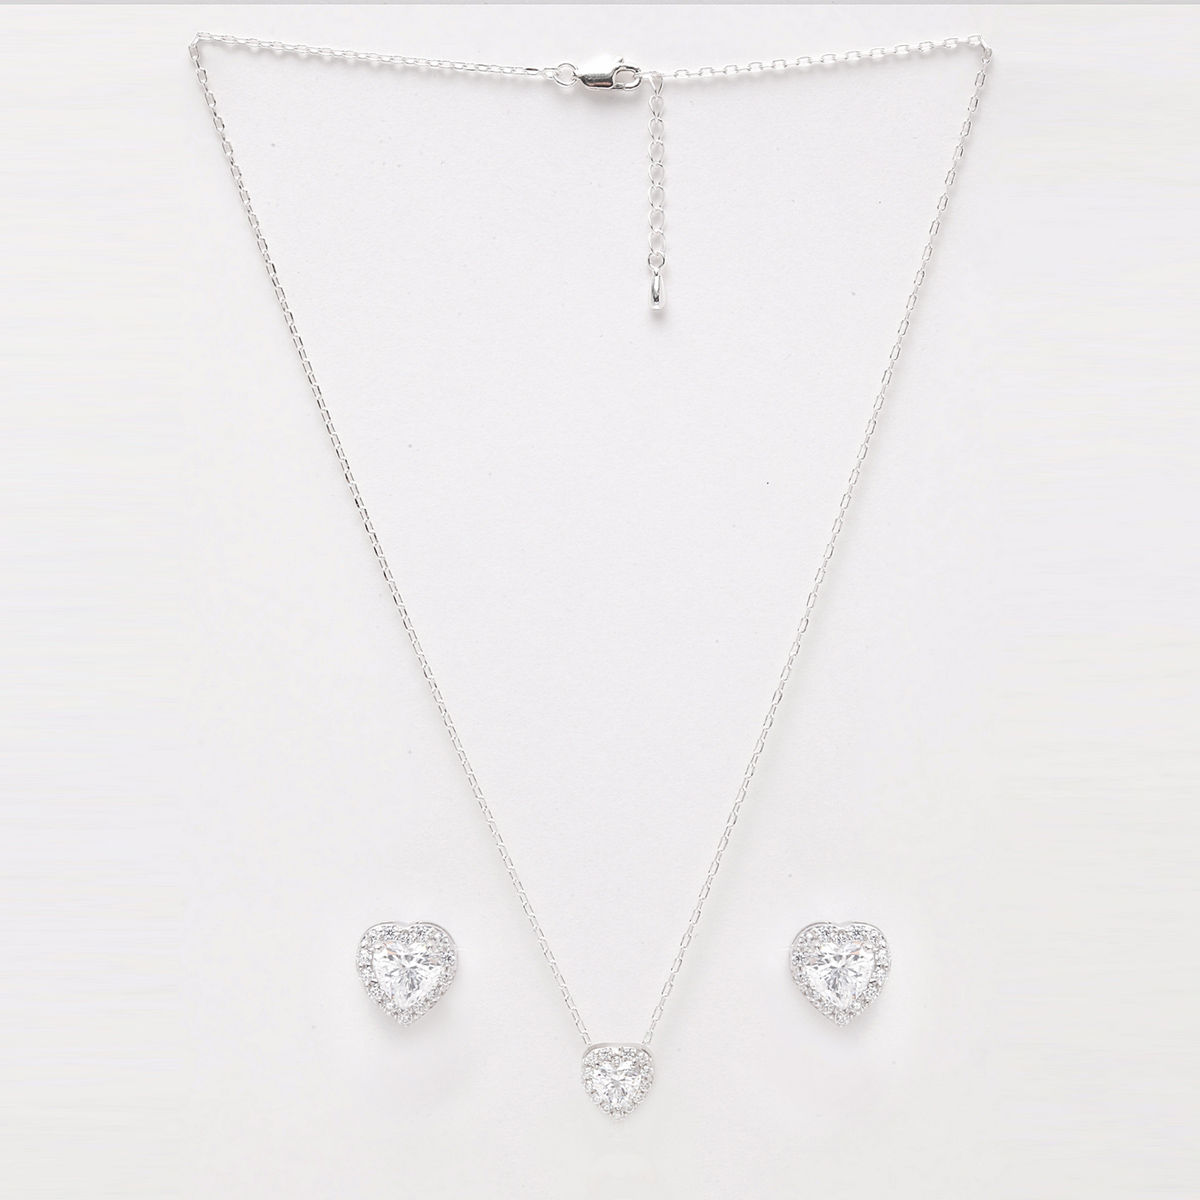 I Am Yours Heart Necklace and Earrings Set – Love and Honor Jesus